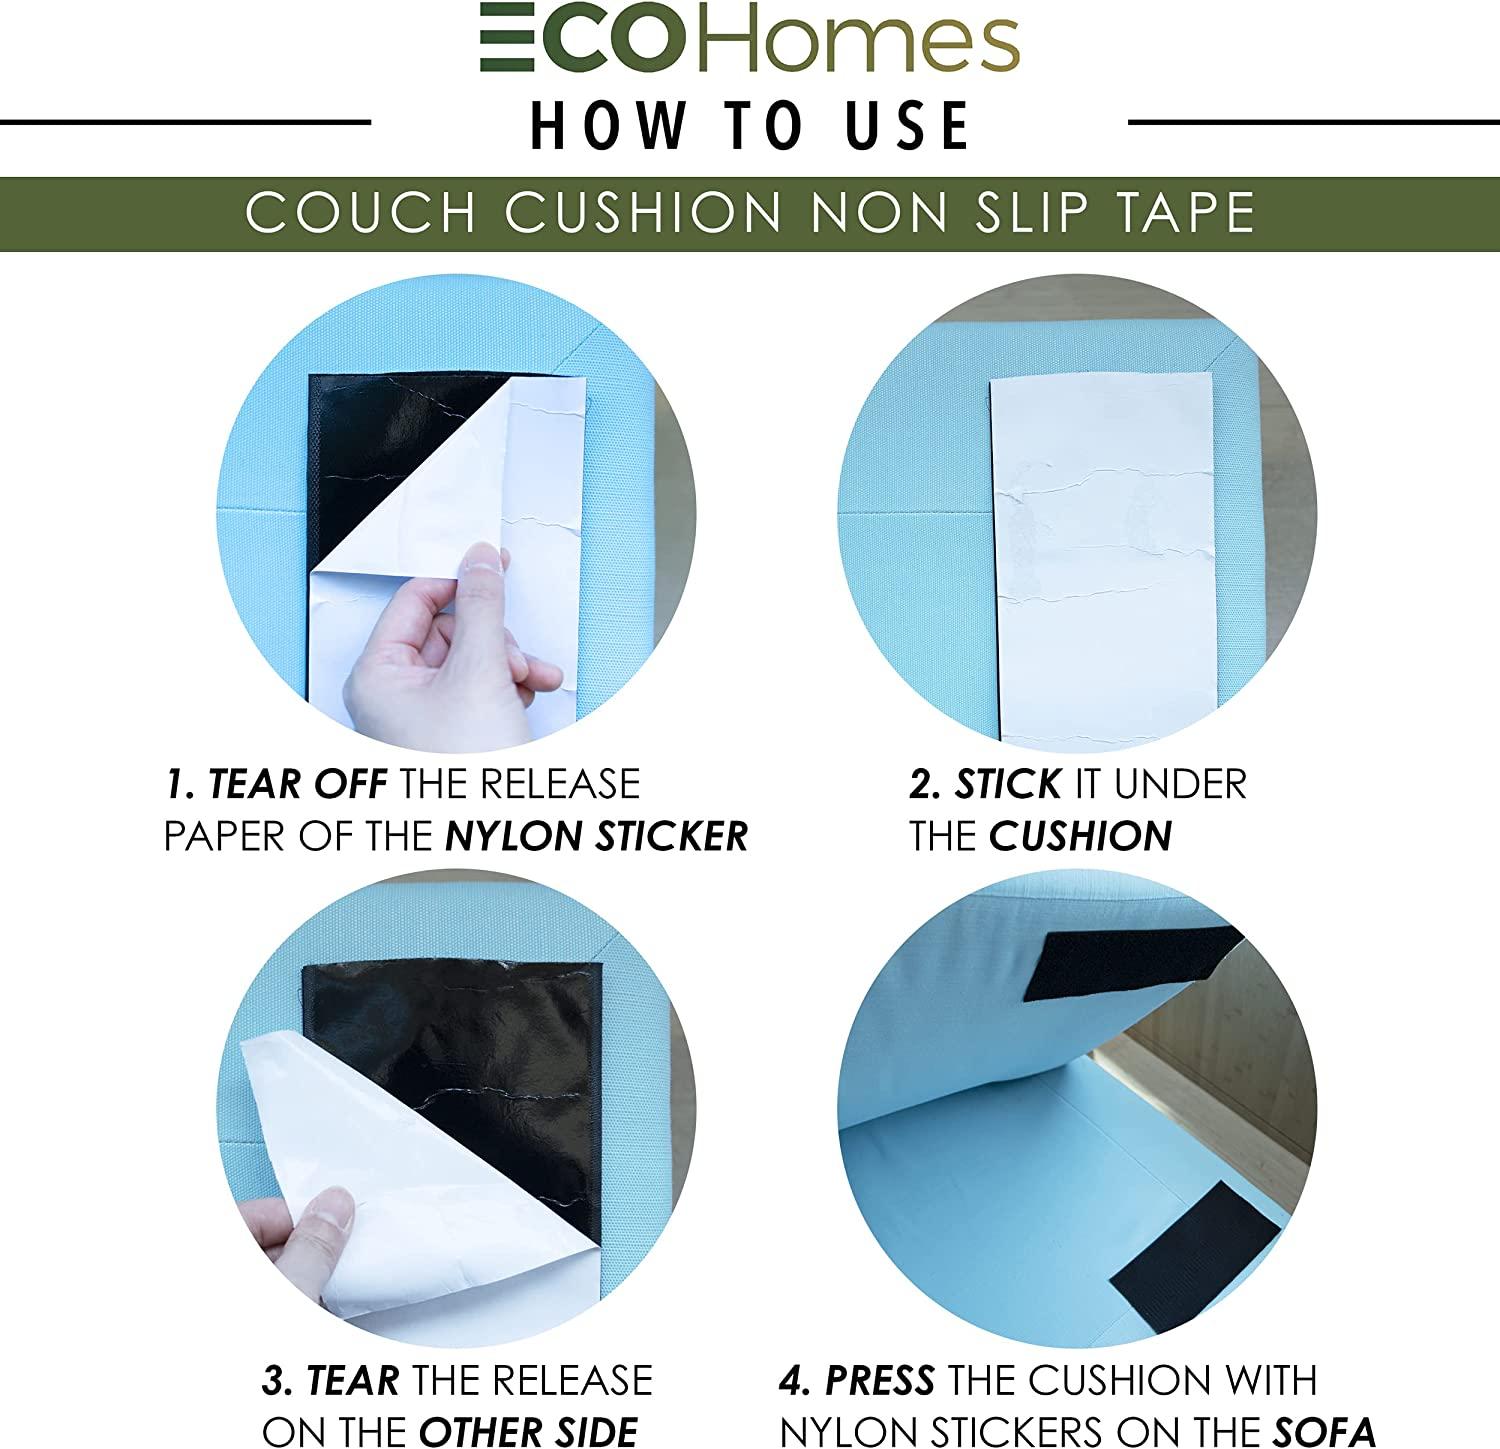  ECOHomes Couch Cushion Grip Tape Keep Couch Cushions